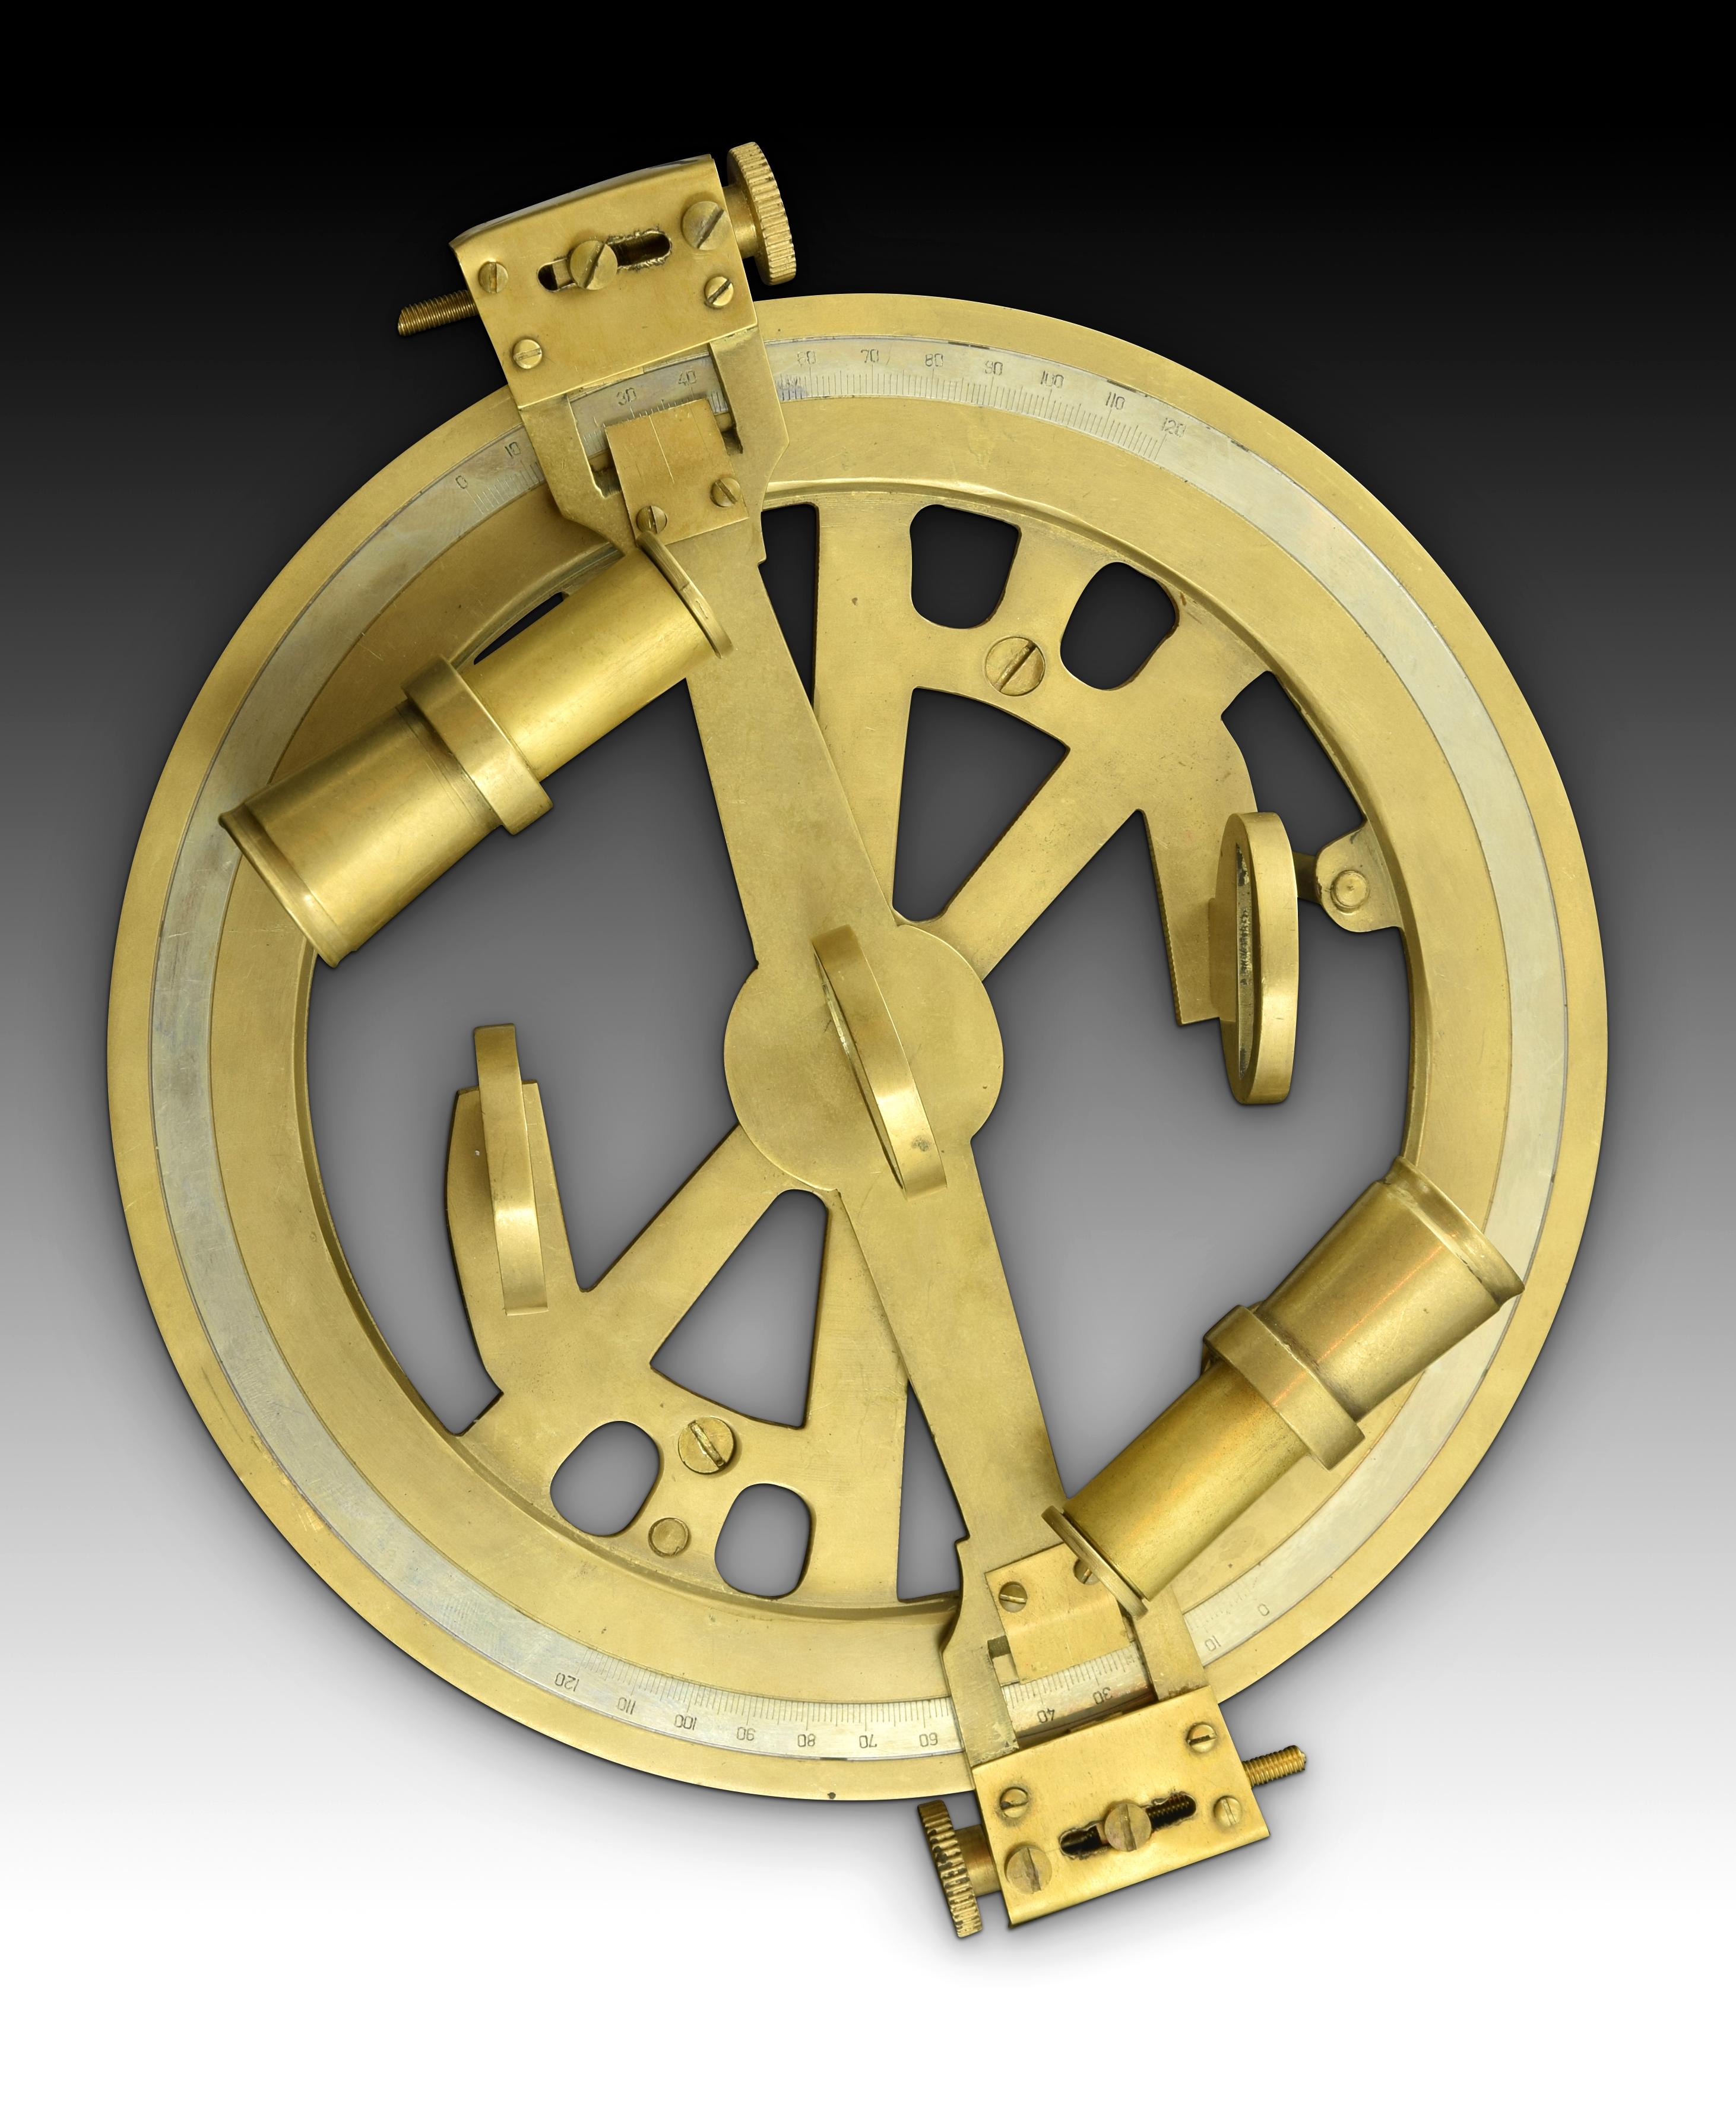 The sextant is an instrument that allows to measure angles between two objects such as two points of a coast or a star, traditionally the sun of the earth and the horizon. Knowing the elevation of the sun and the time of day you can determine the